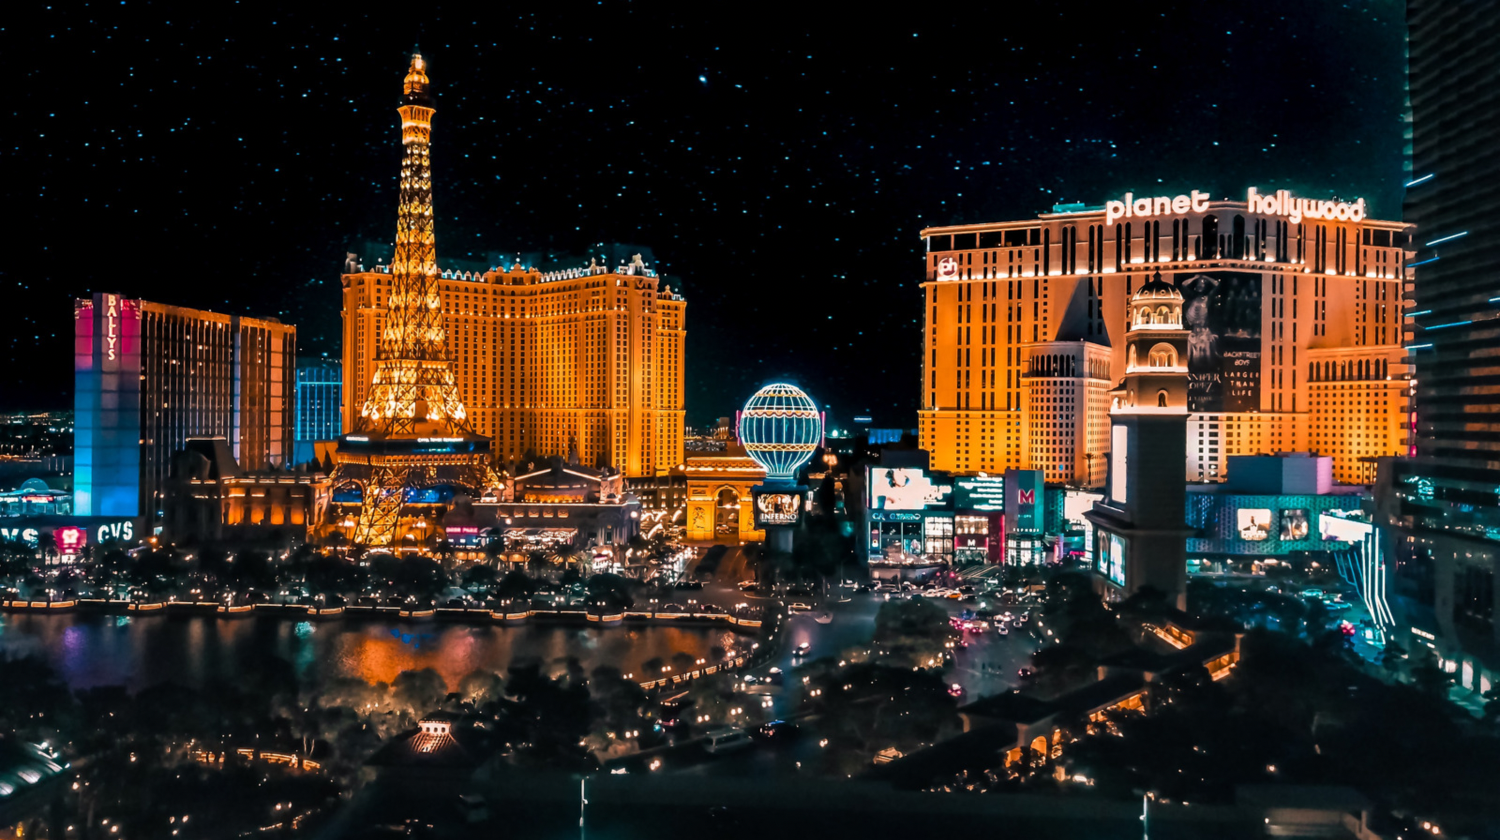 Las vegas august cryptocurrency conference ethereum staging grounds